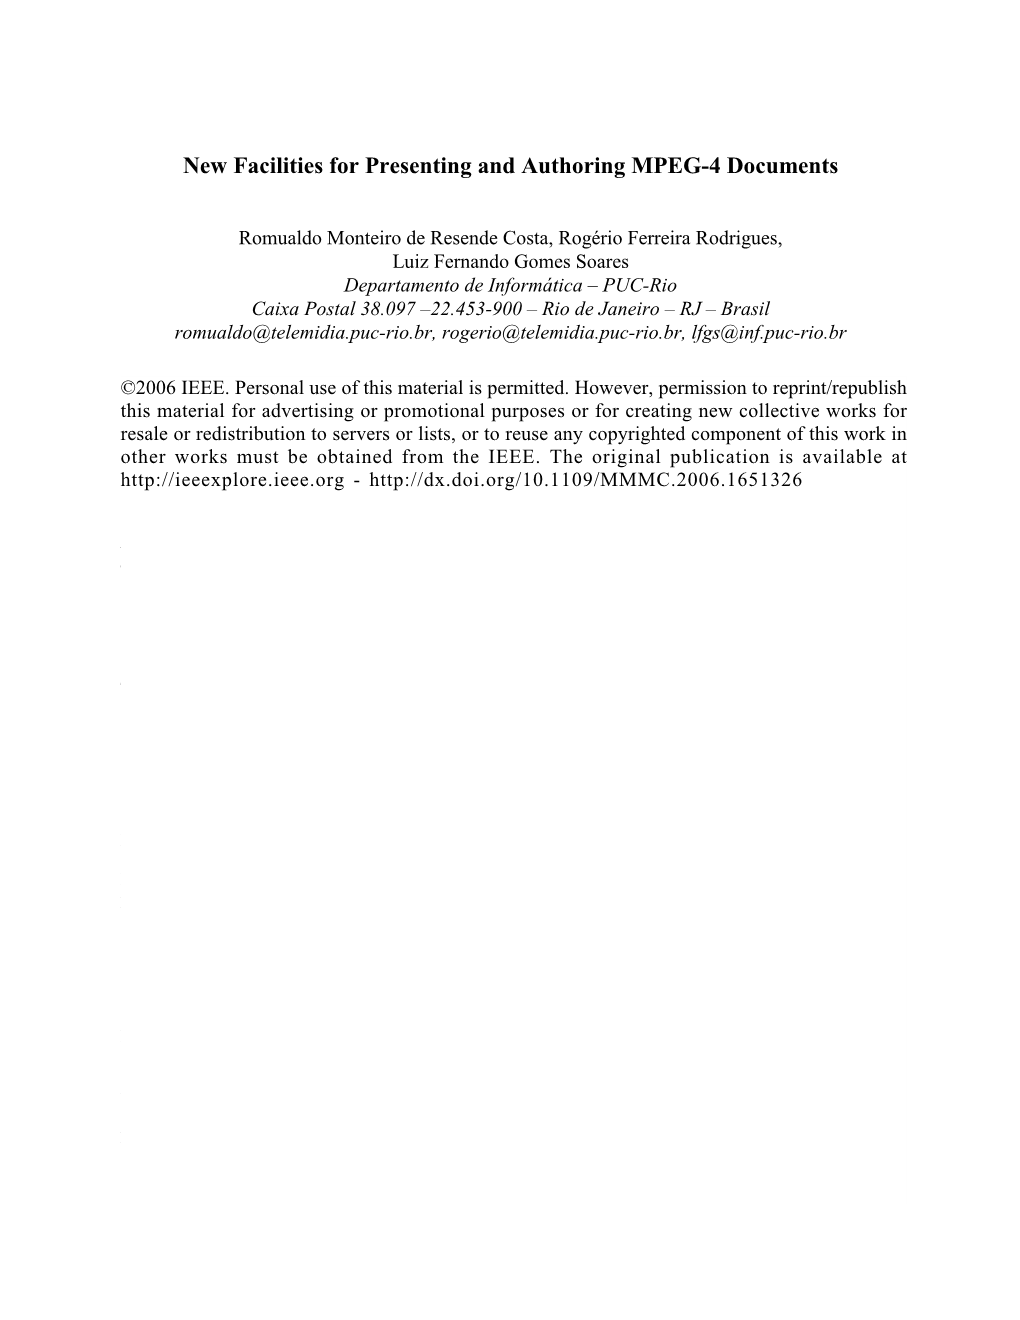 New Facilities for Presenting and Authoring MPEG-4 Documents